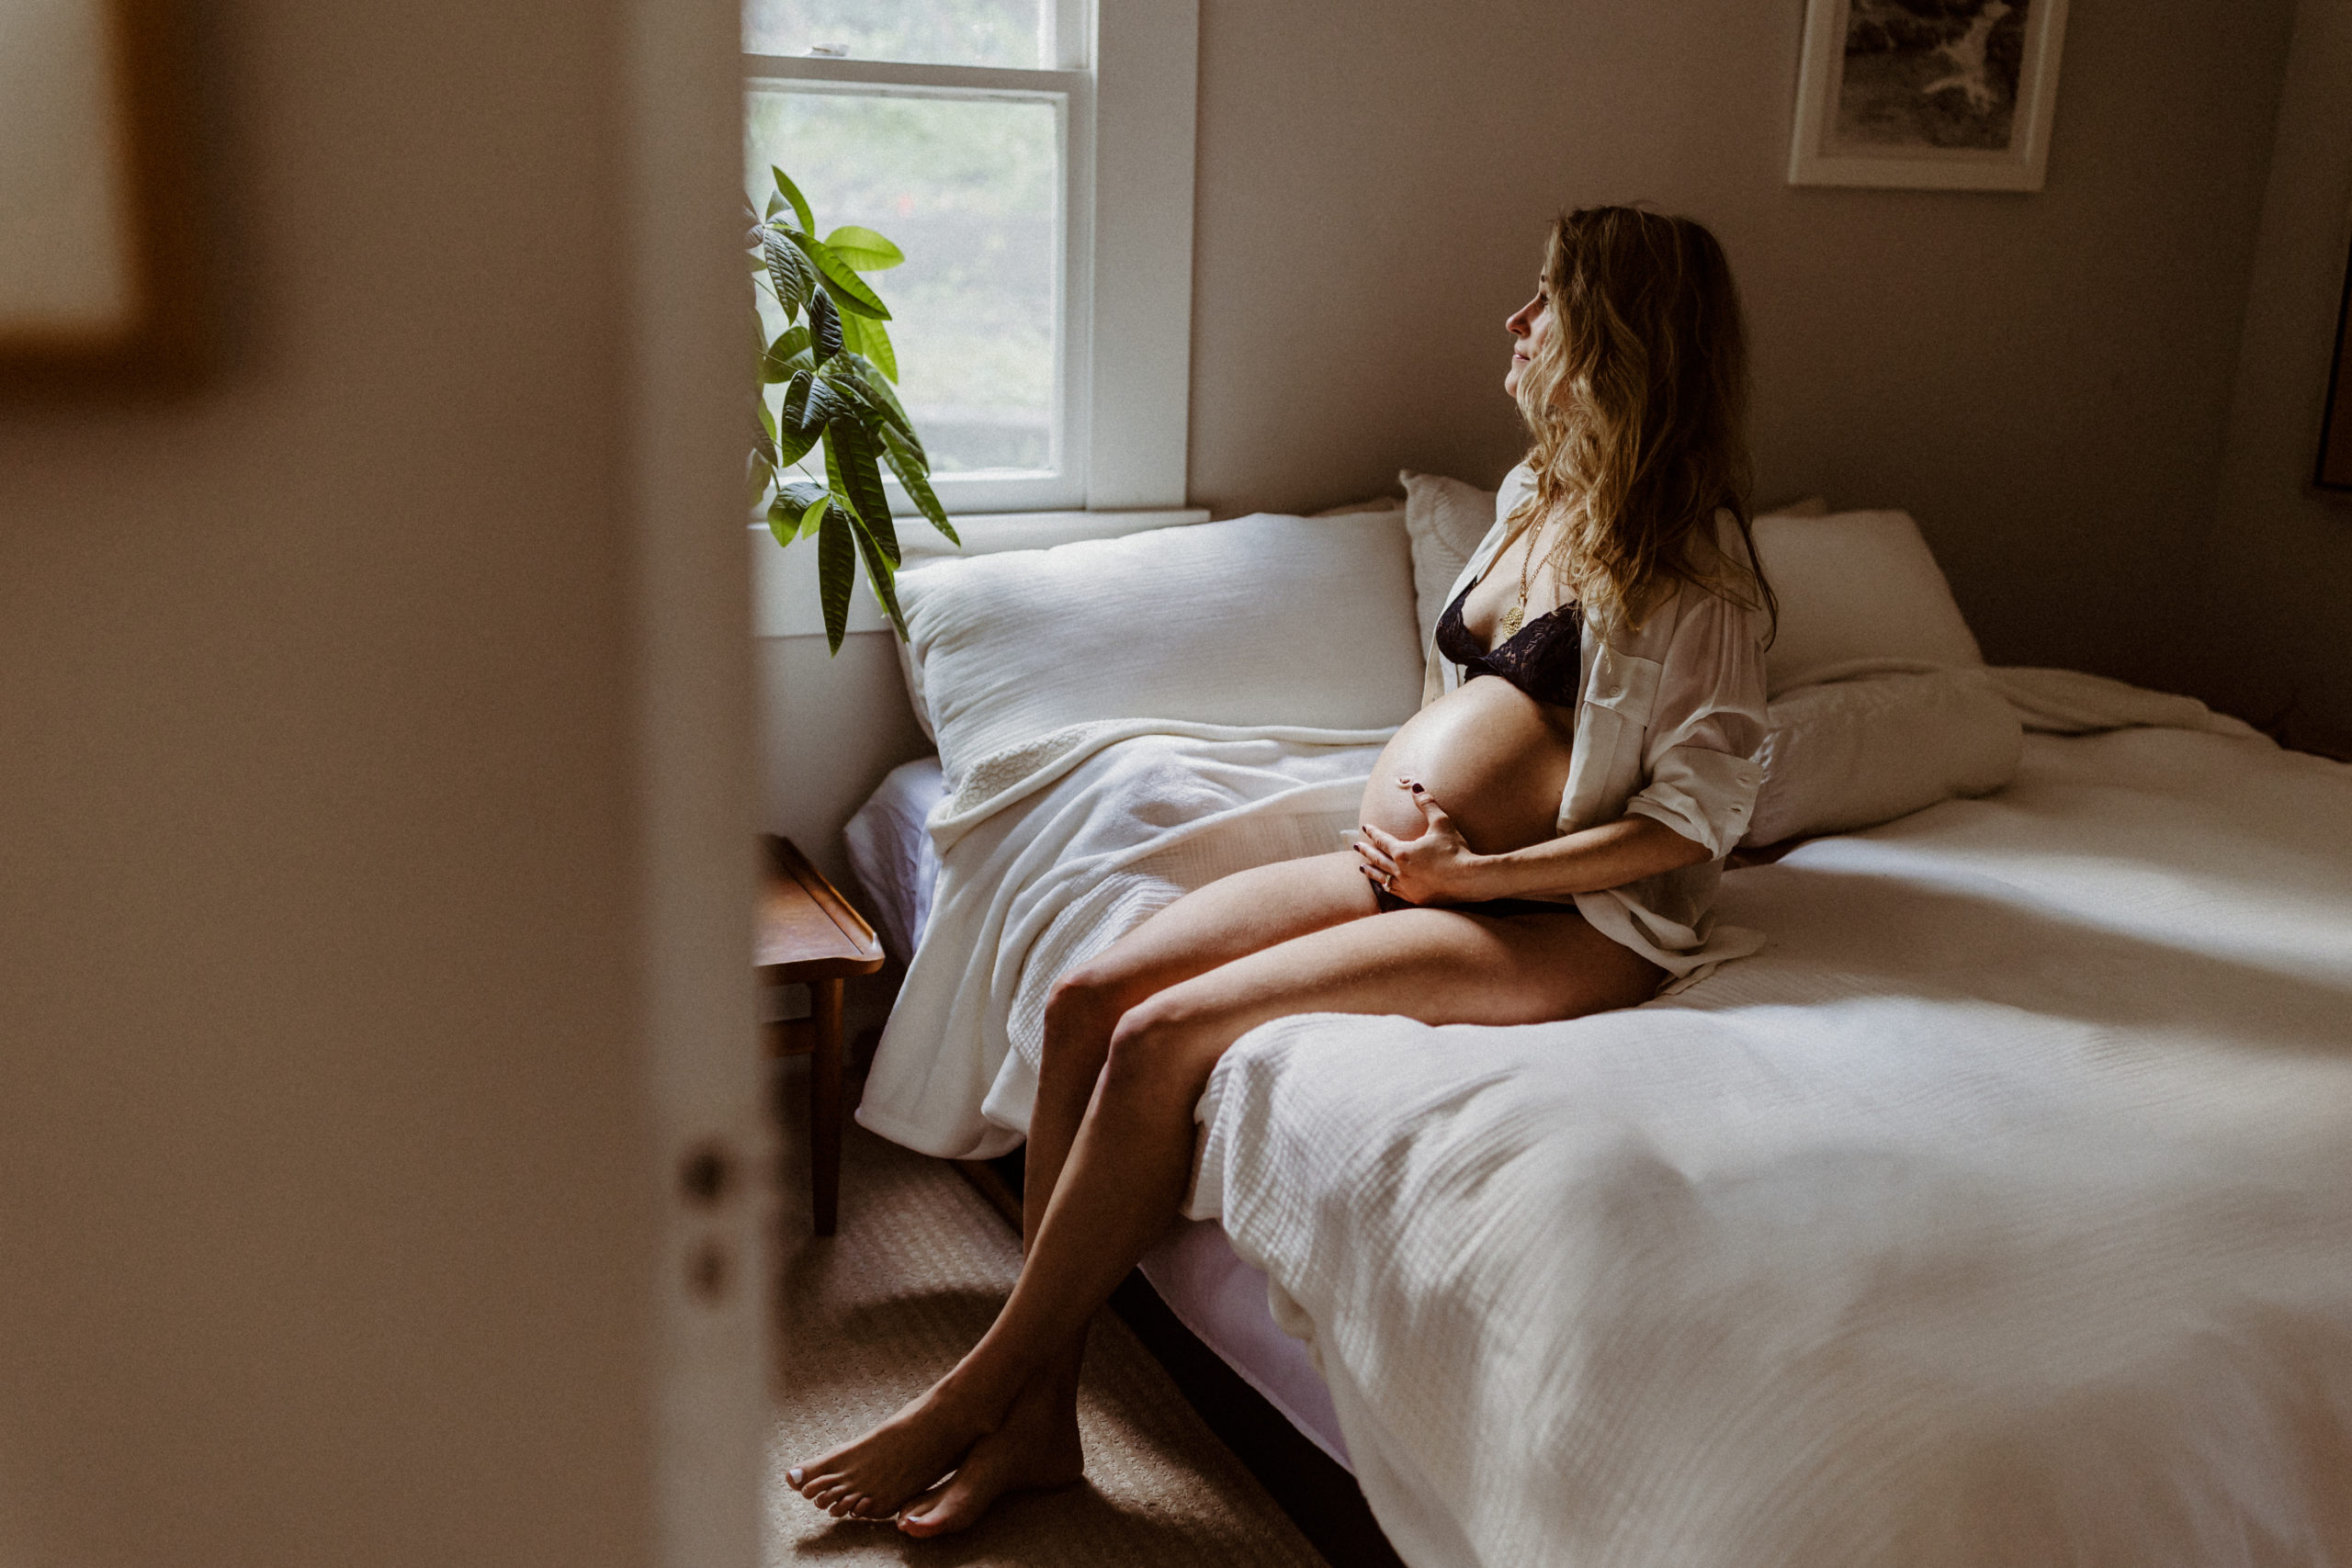 pregnant woman sitting on bed and looking out window, intimate maternity photo, pregnancy photo